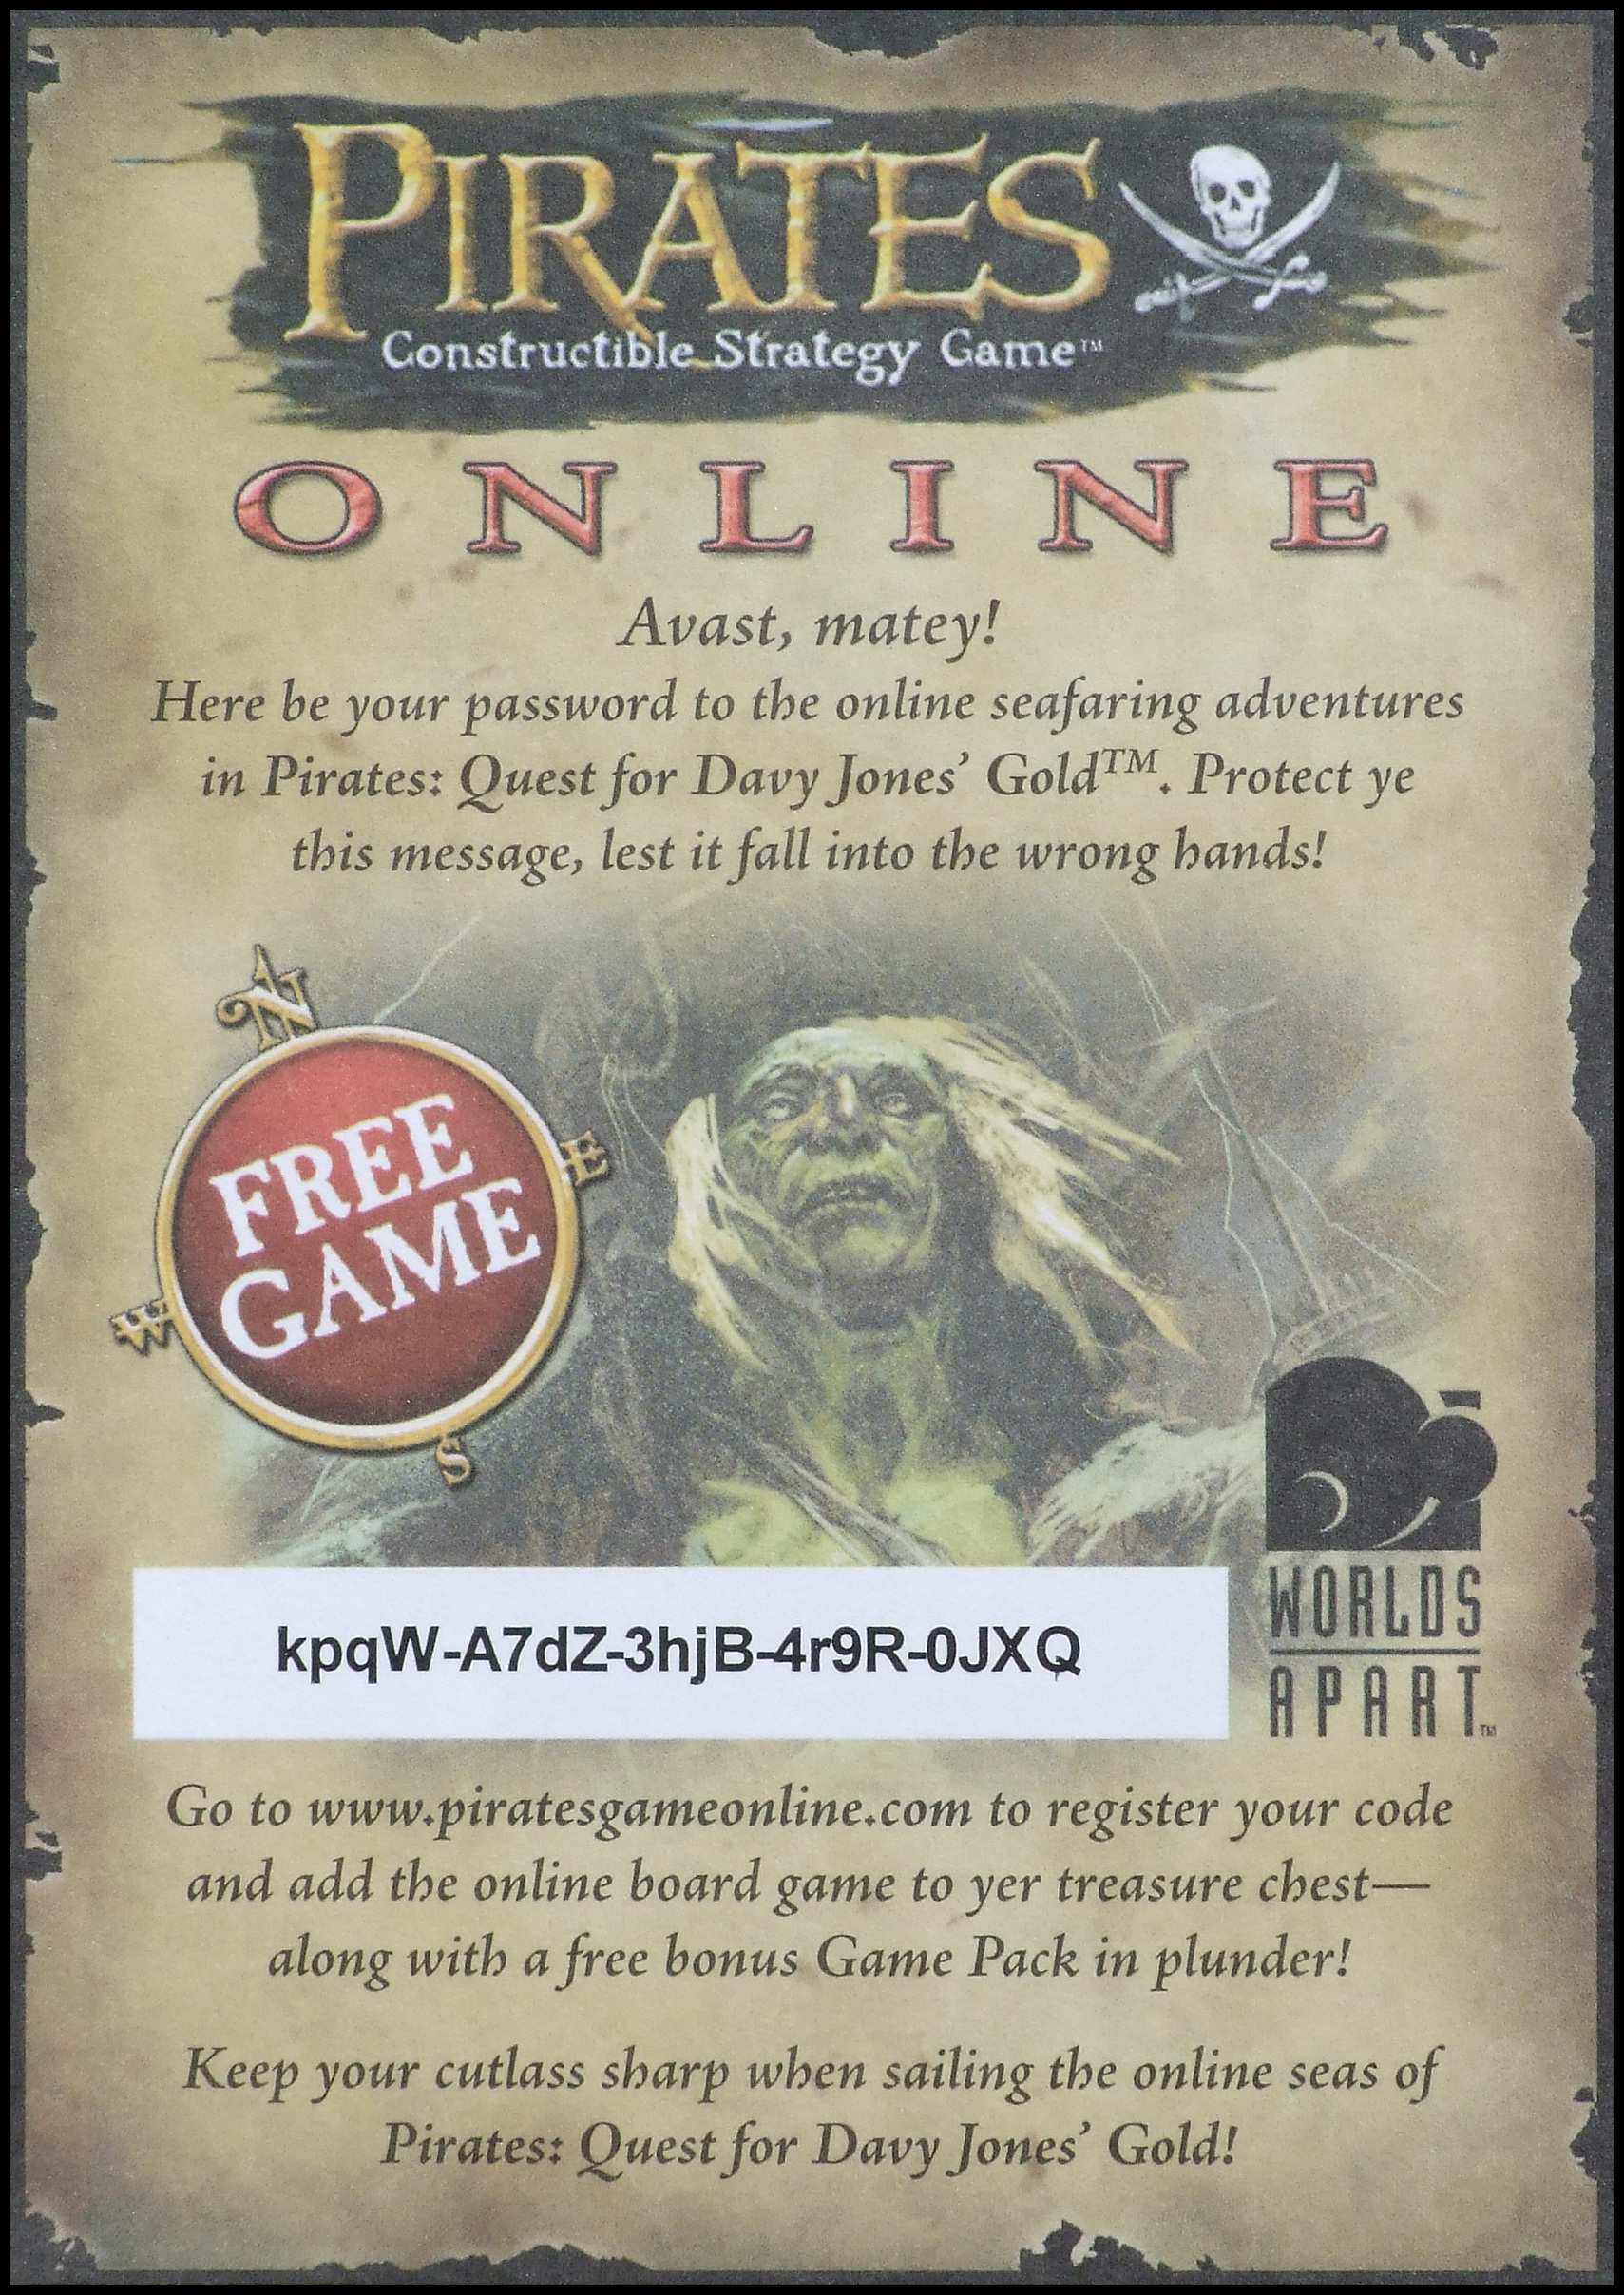 Pirates Quest For Davy Jones' Gold Board Game - Online Game Code Card